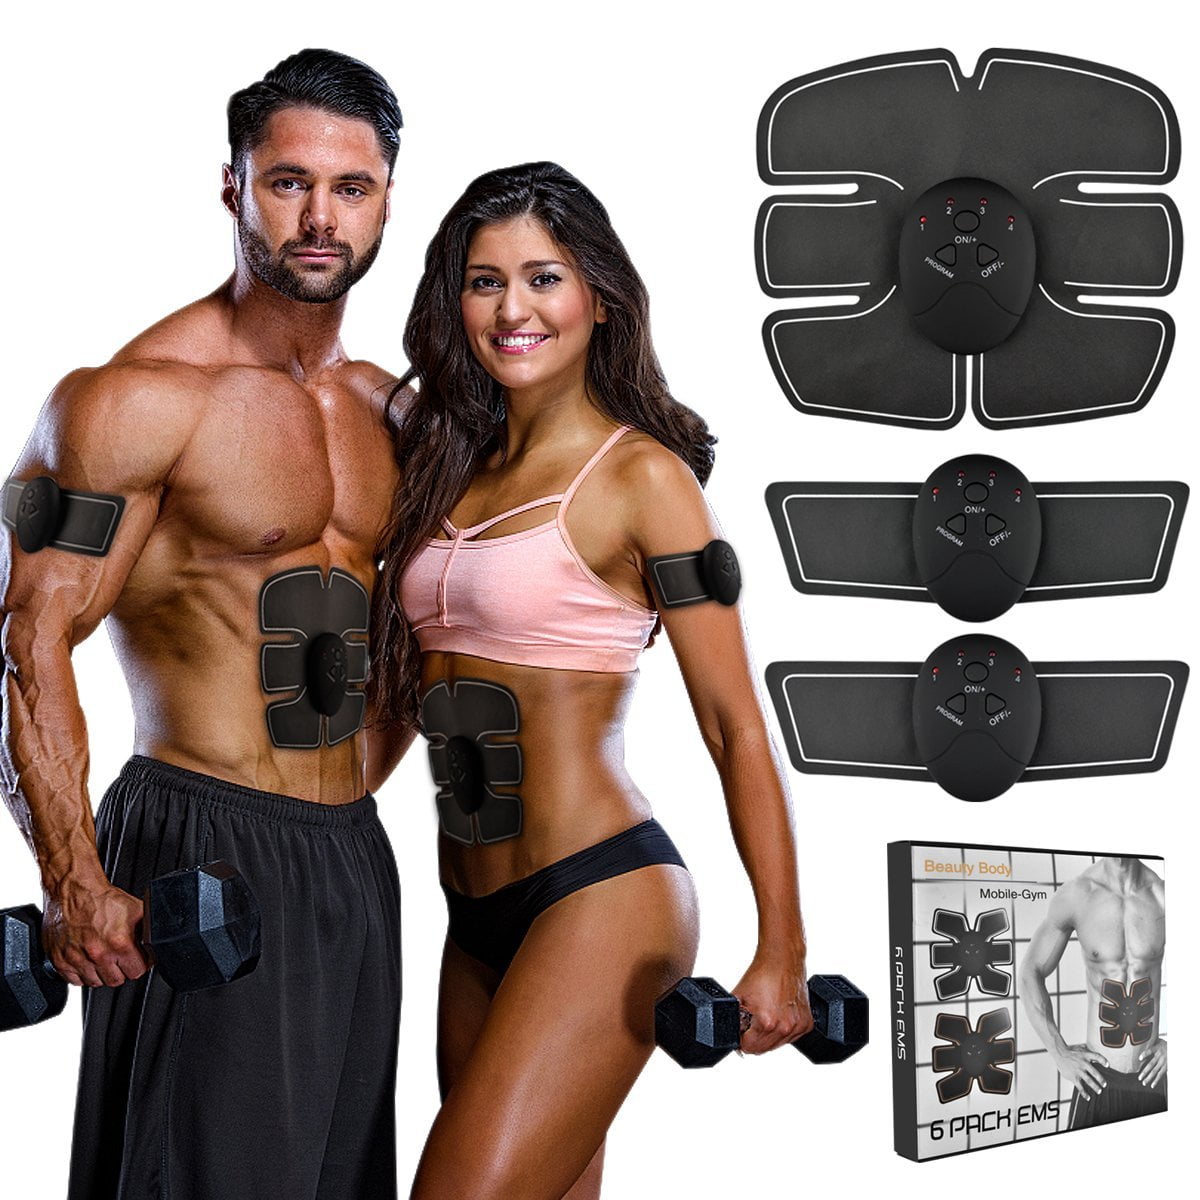 Ifanze Abs Stimulator, Ab Stimulator, Rechargeable Ultimate Muscle Toner  Trainer for Men Women Abdominal Fitness Workout EMS Muscle Stimulation with